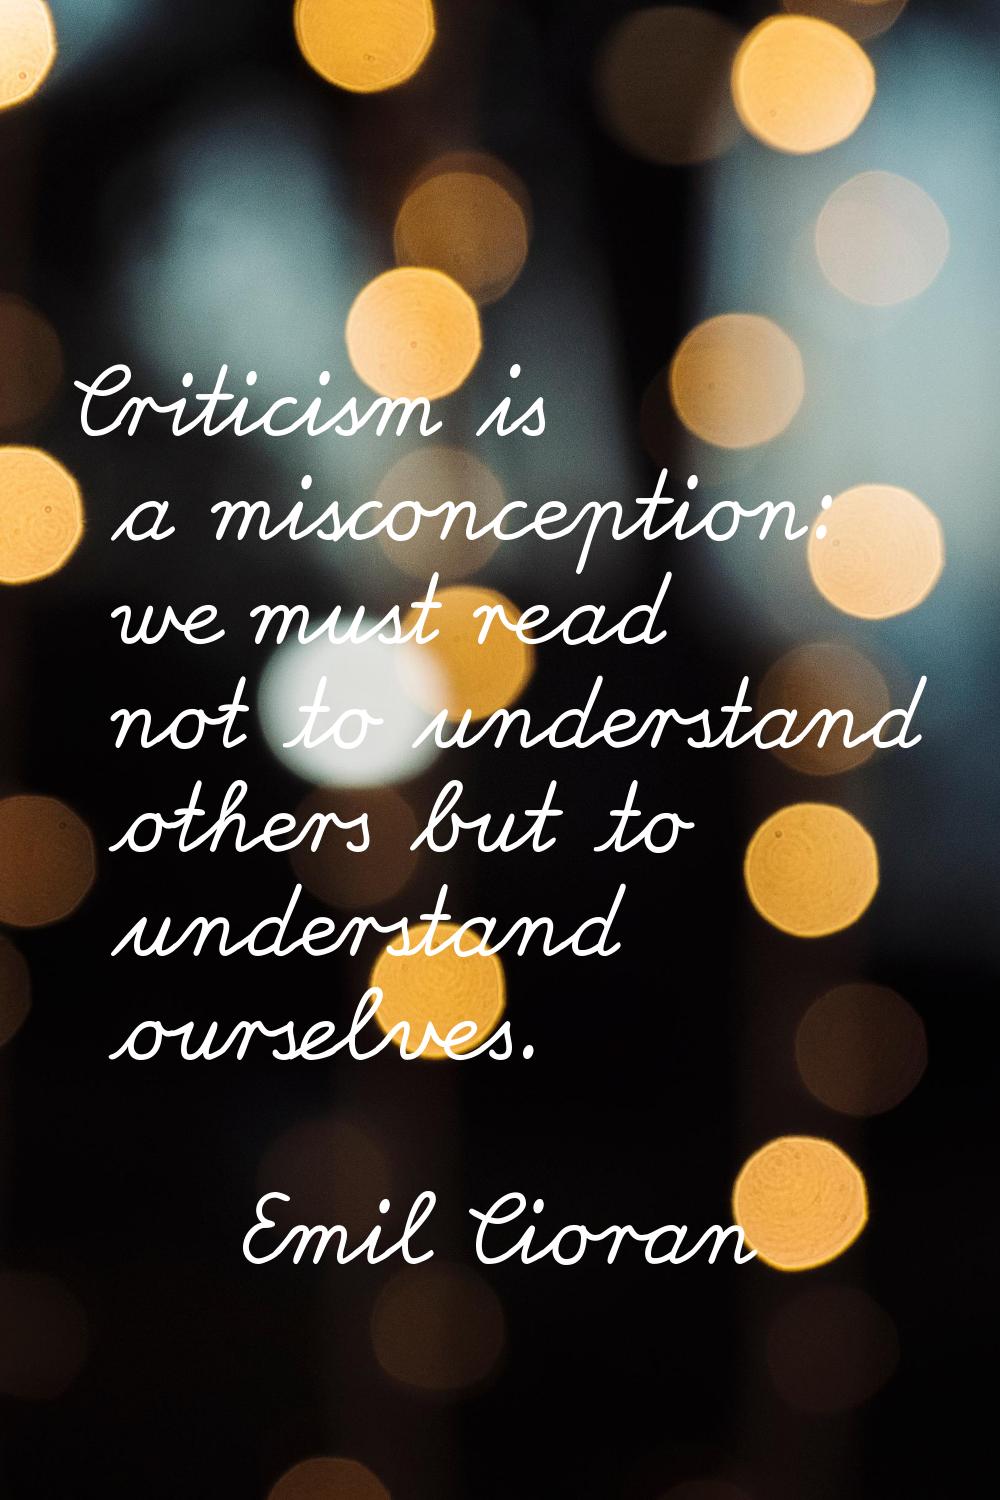 Criticism is a misconception: we must read not to understand others but to understand ourselves.